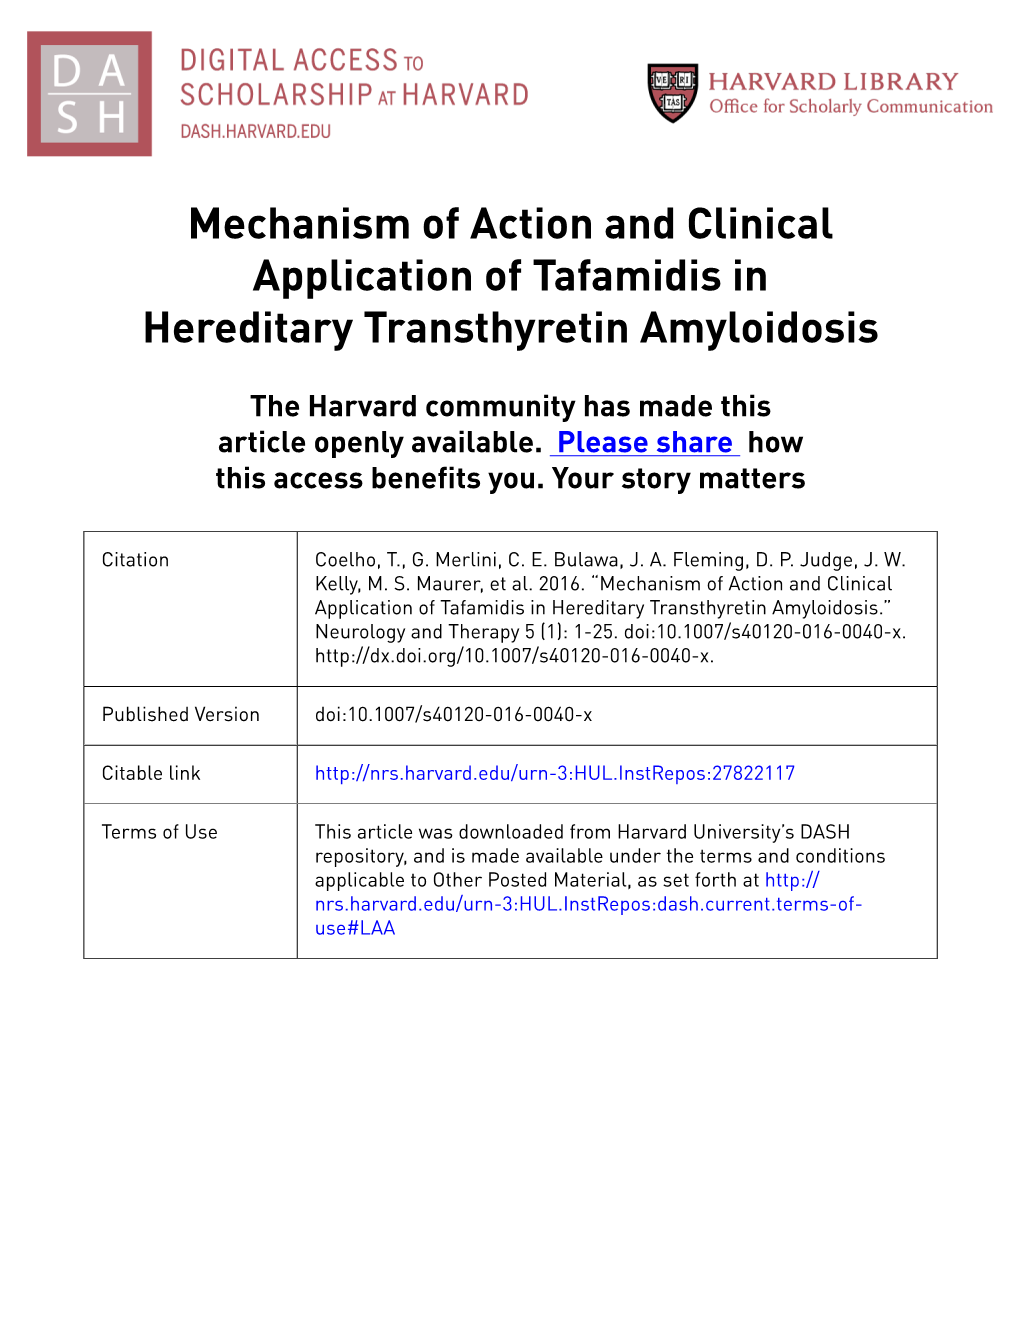 Mechanism of Action and Clinical Application of Tafamidis in Hereditary Transthyretin Amyloidosis